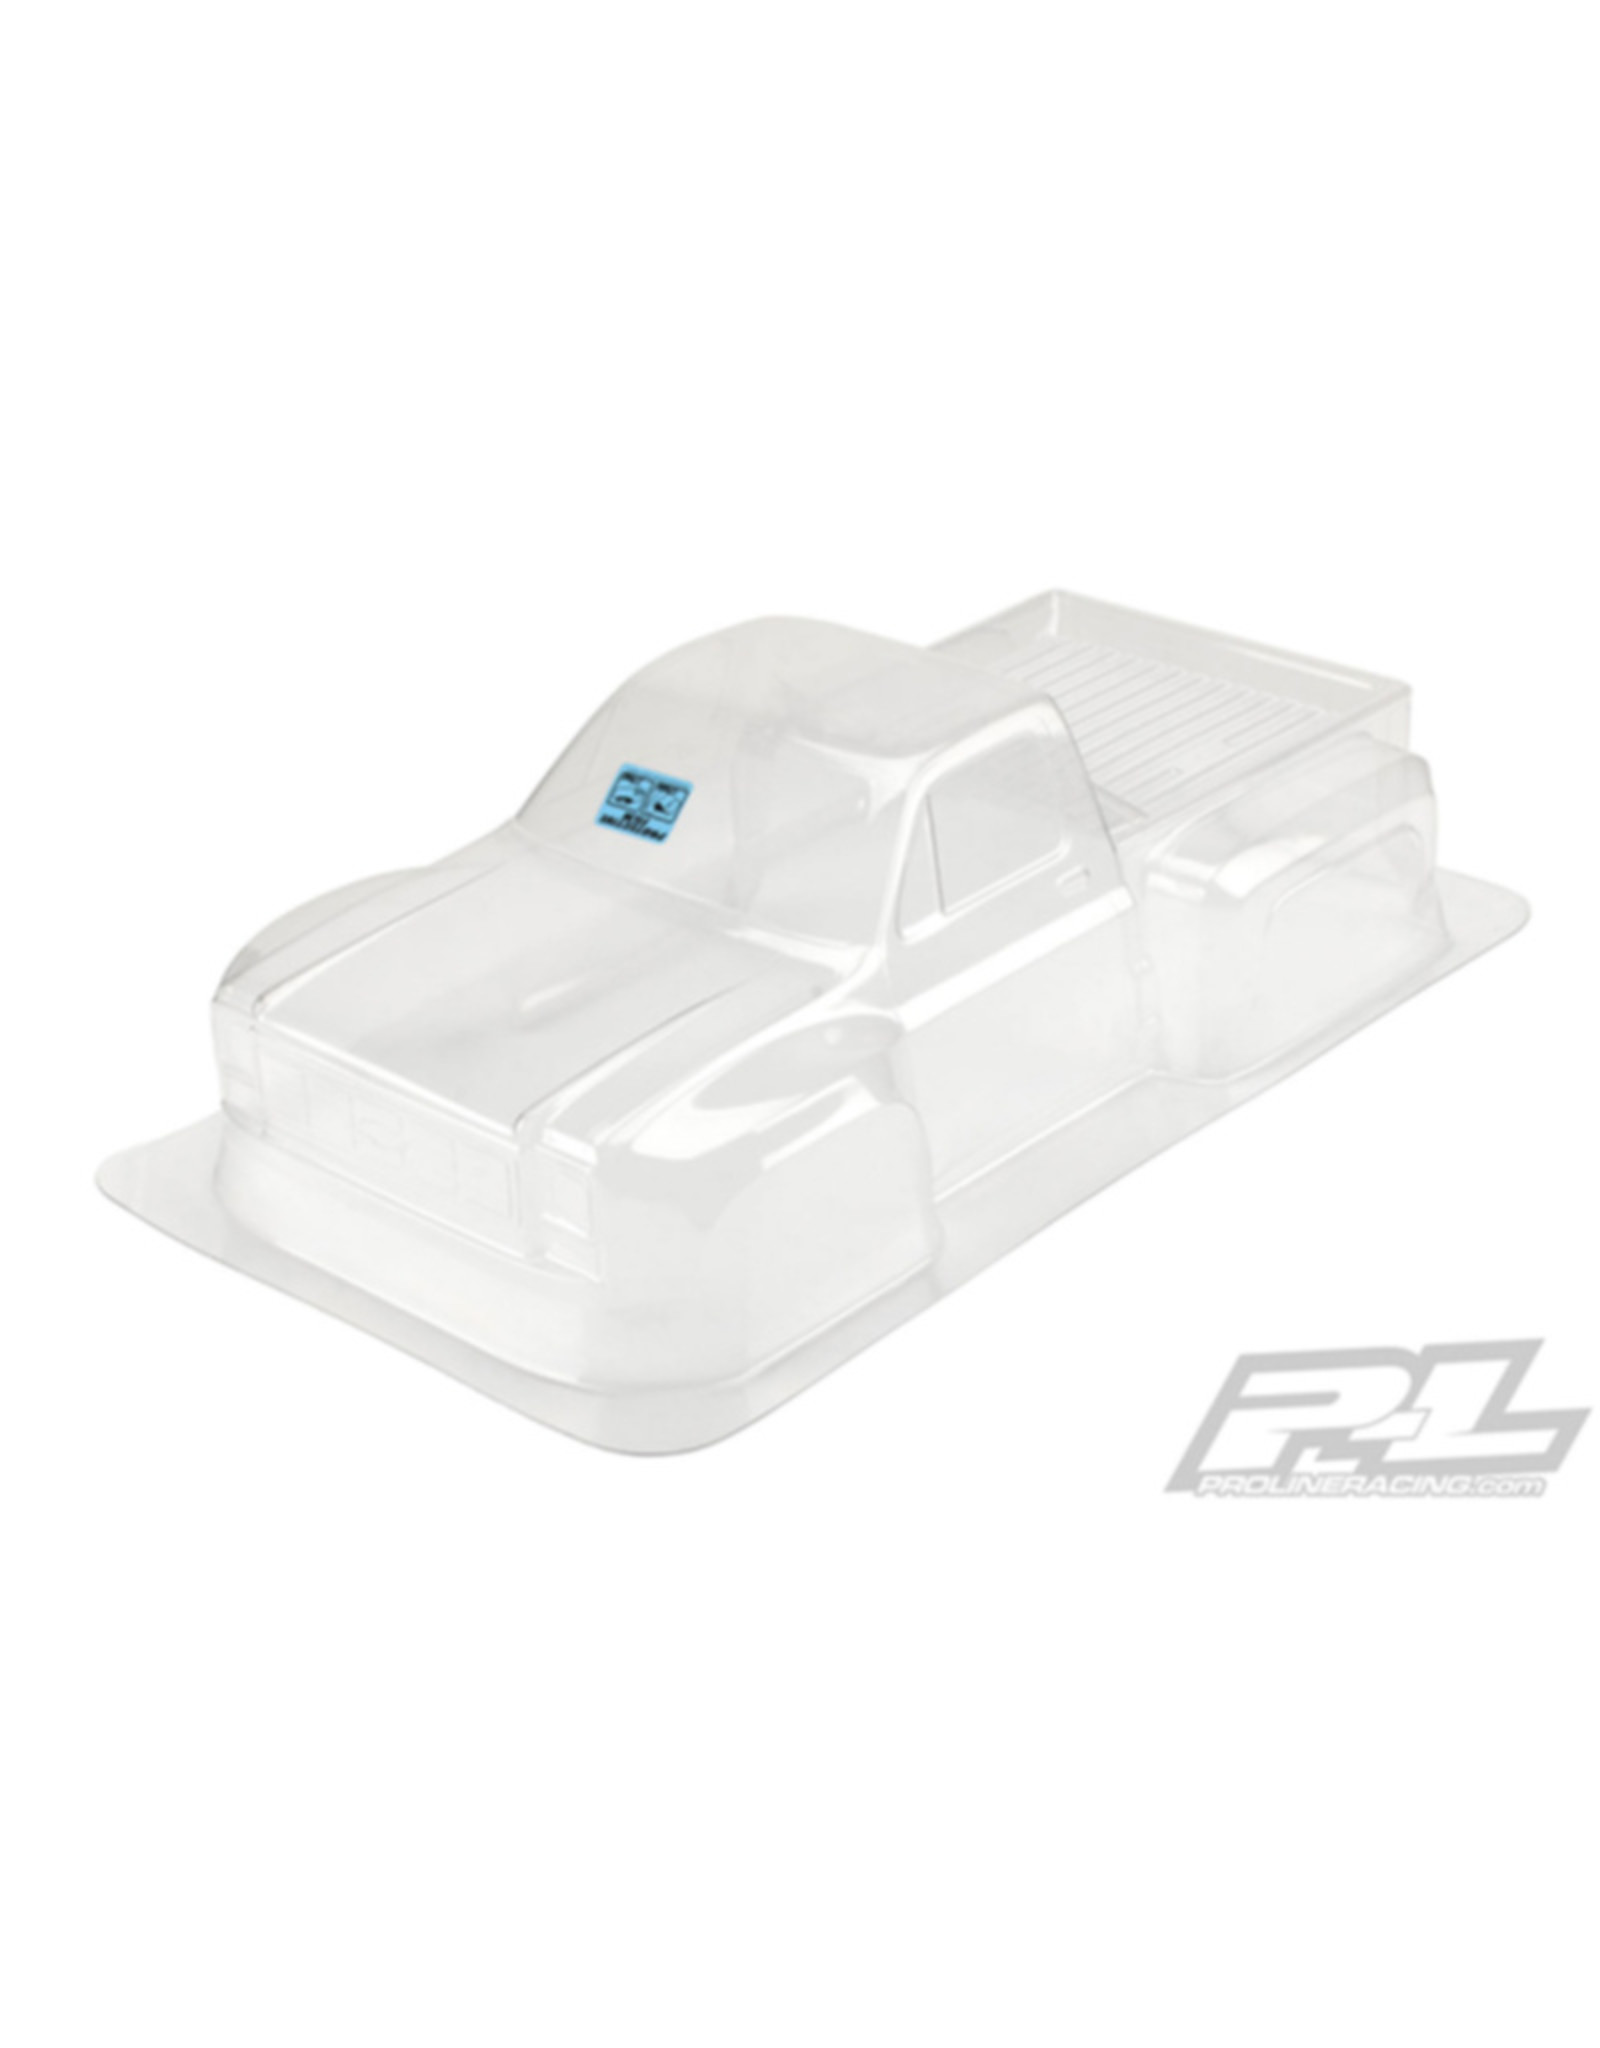 Pro-Line Racing PRO351000  1978 Chevy C-10 Race Truck Clear Body : SLH 2WD